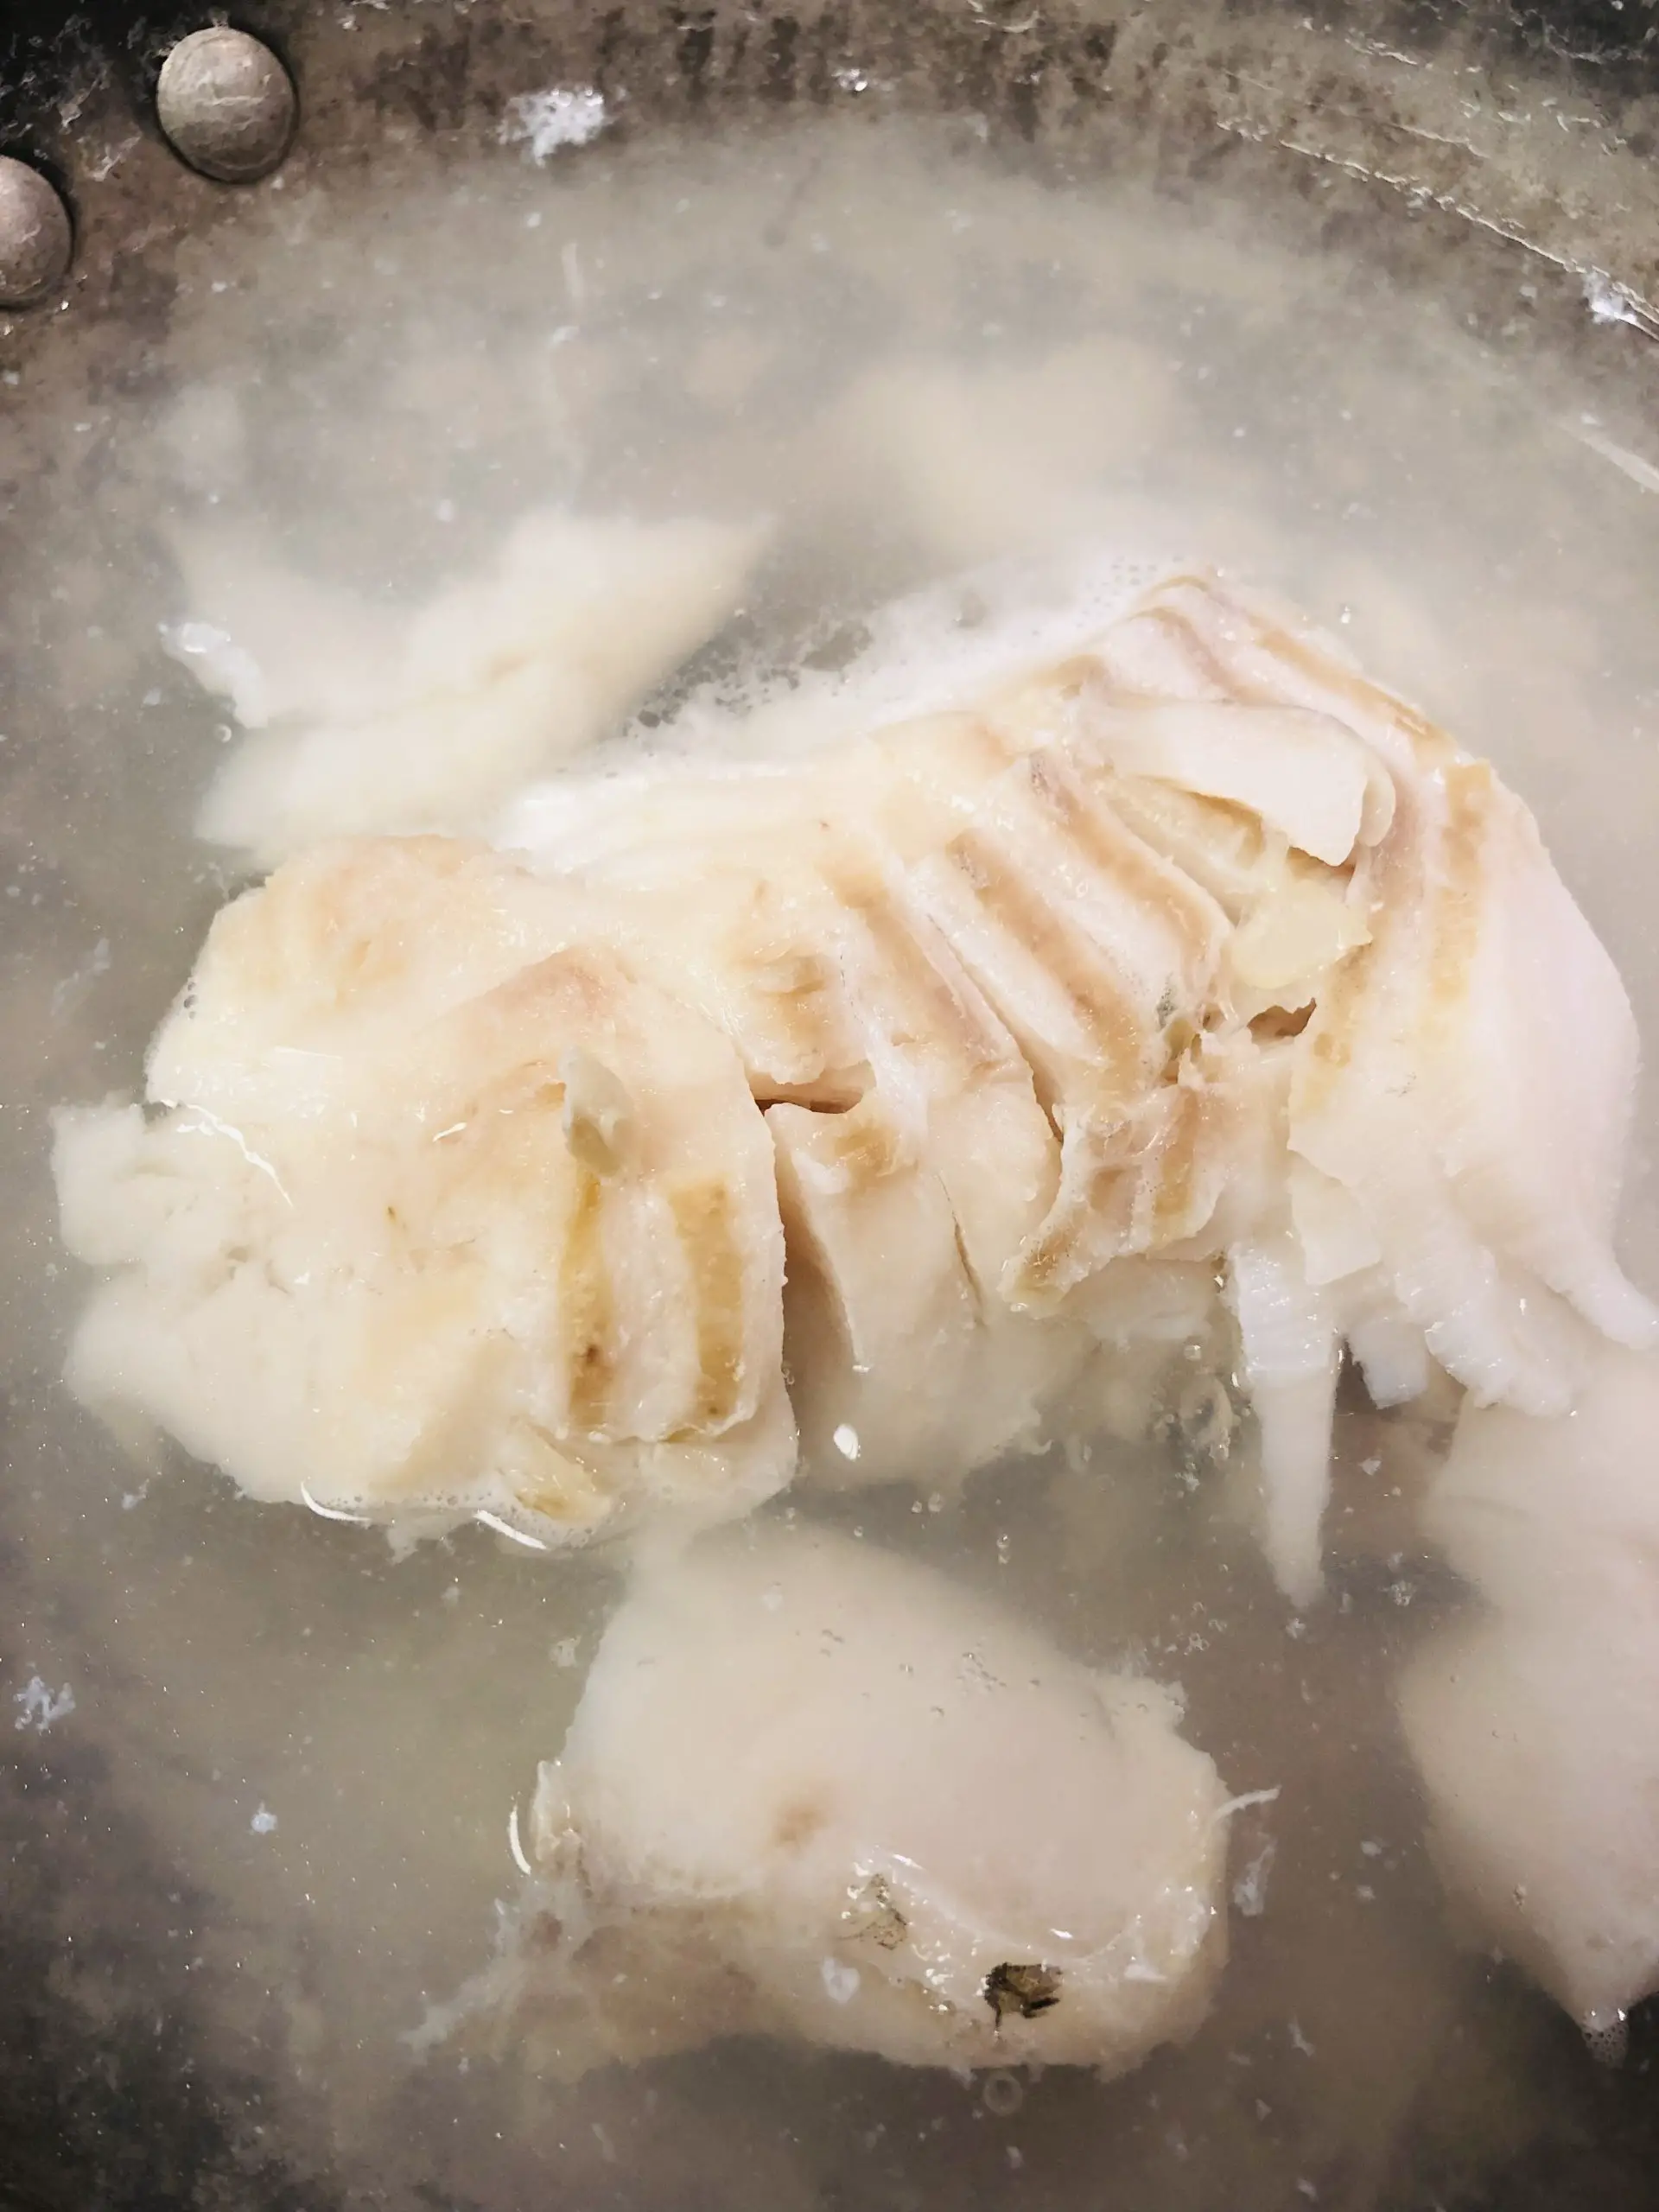 flaky cod in water in a skillet